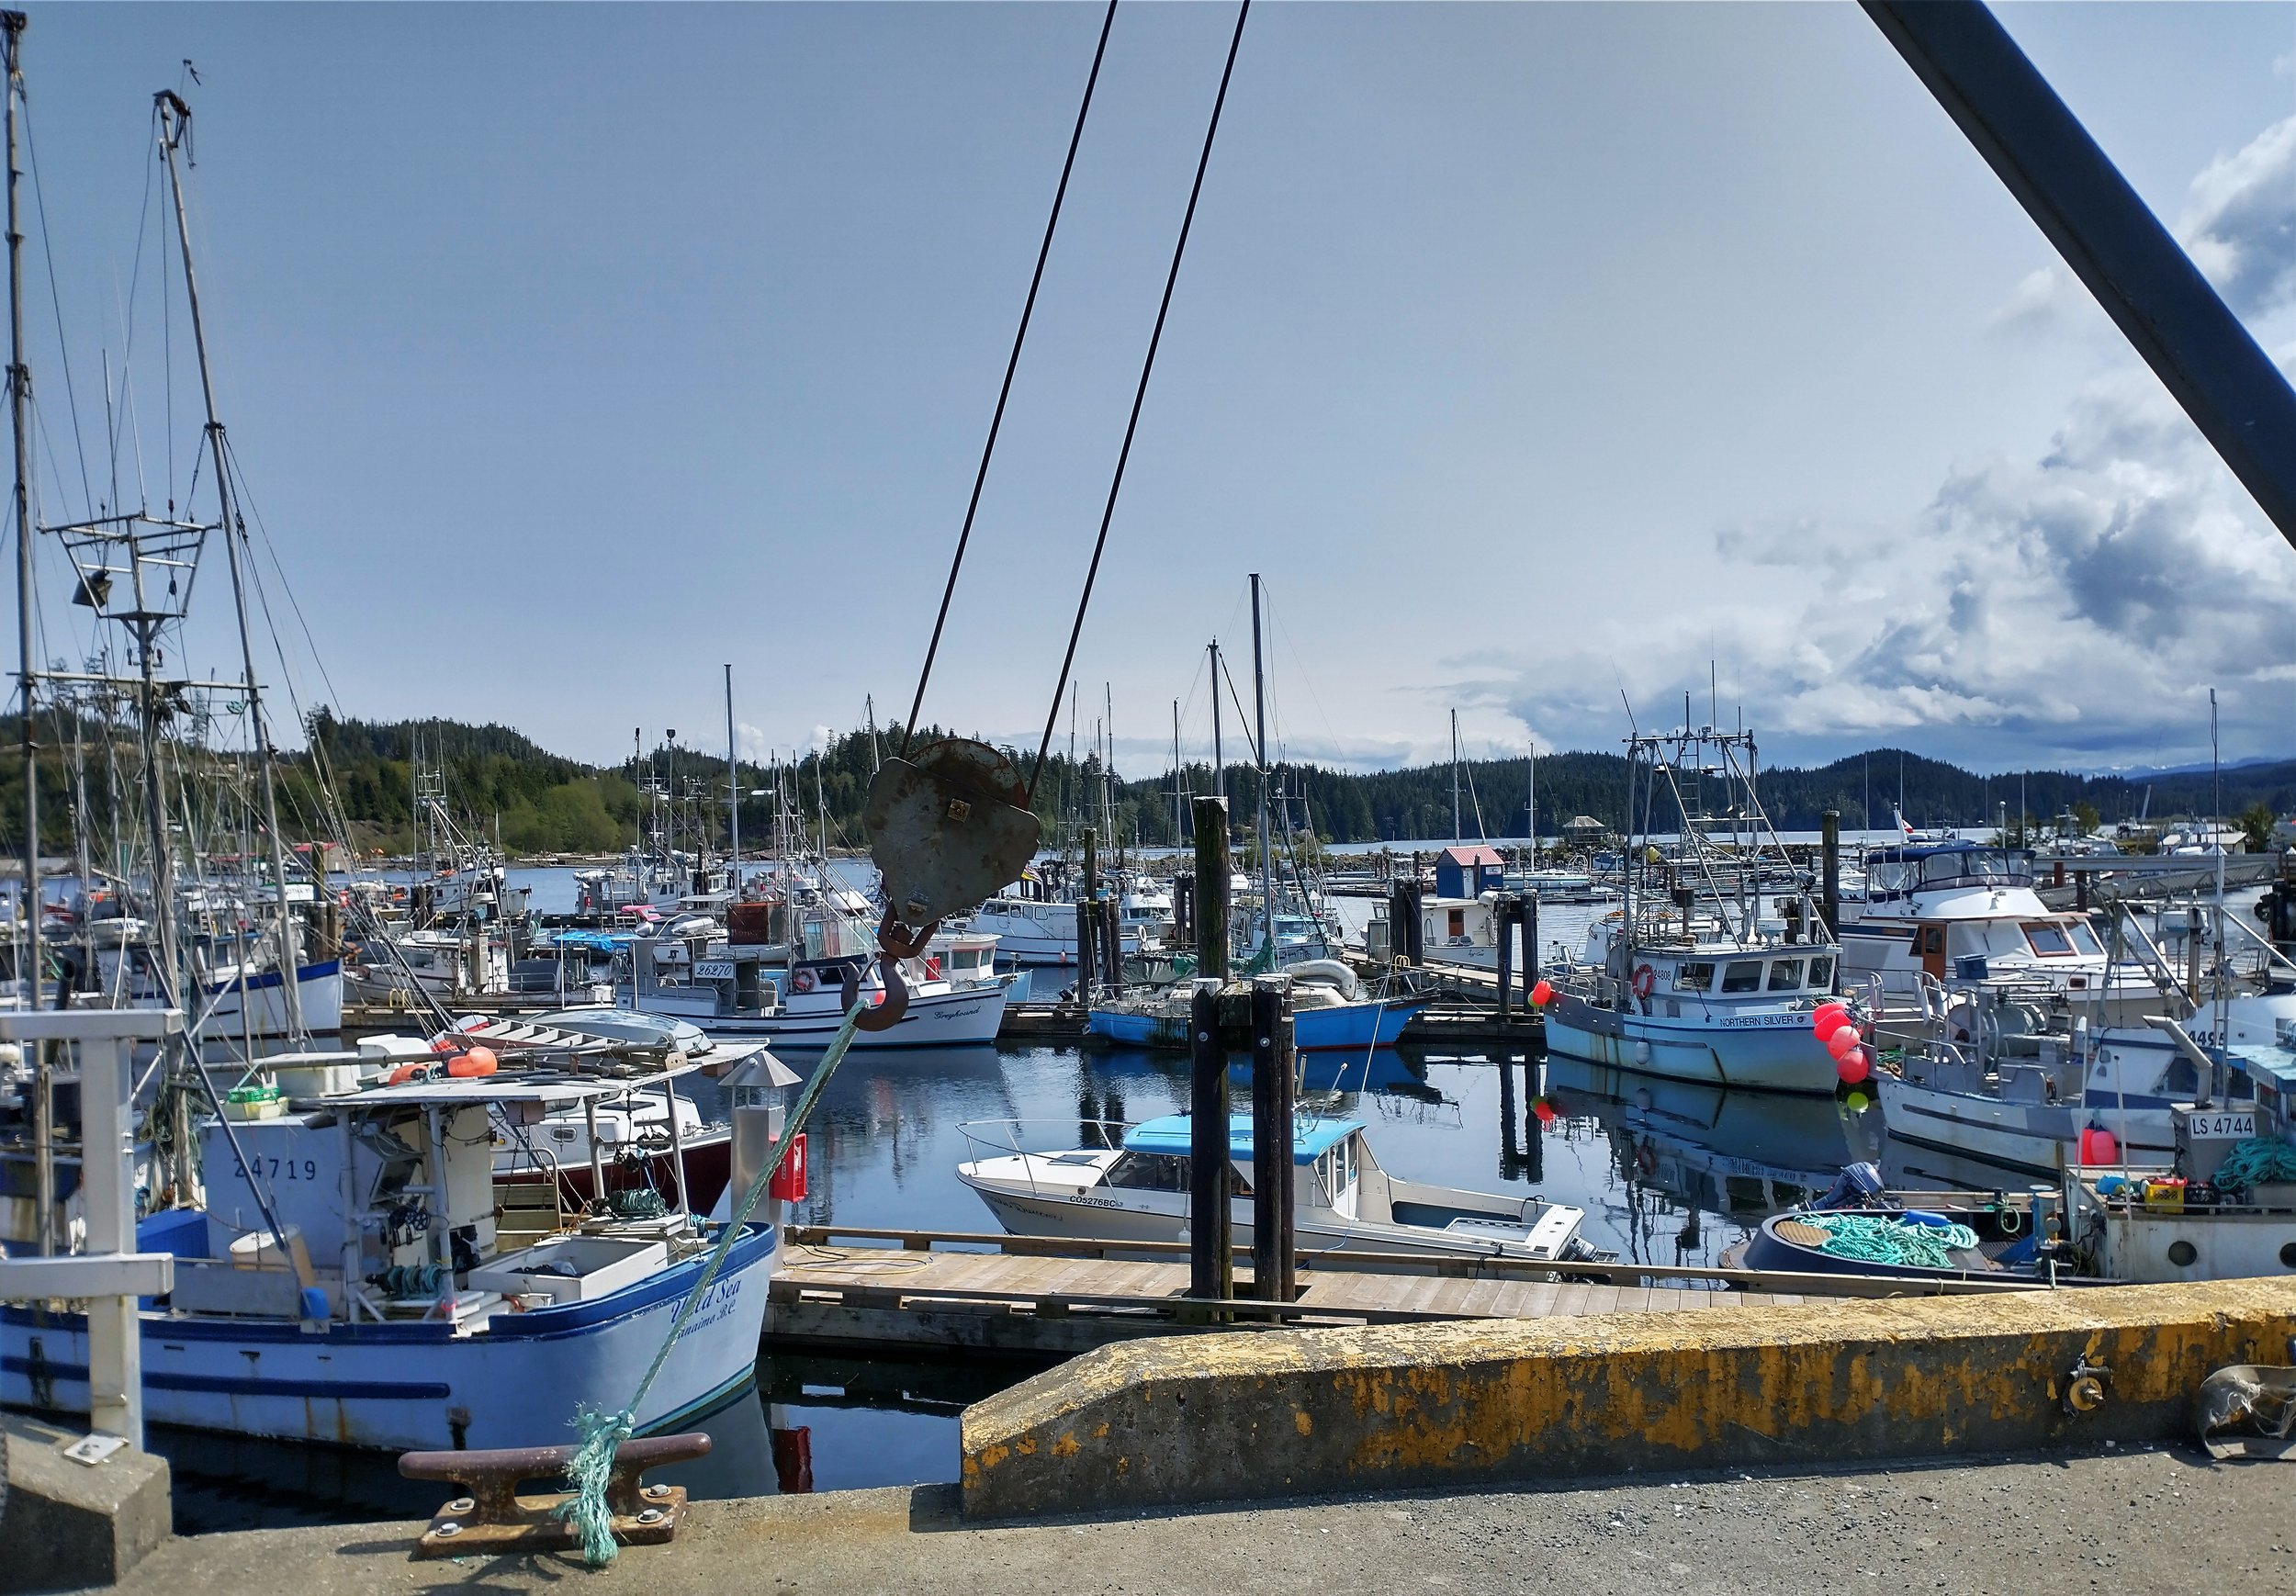  The harbor itself, seems to be much more for commercial fishing than you’d see on the rest of the Island.  